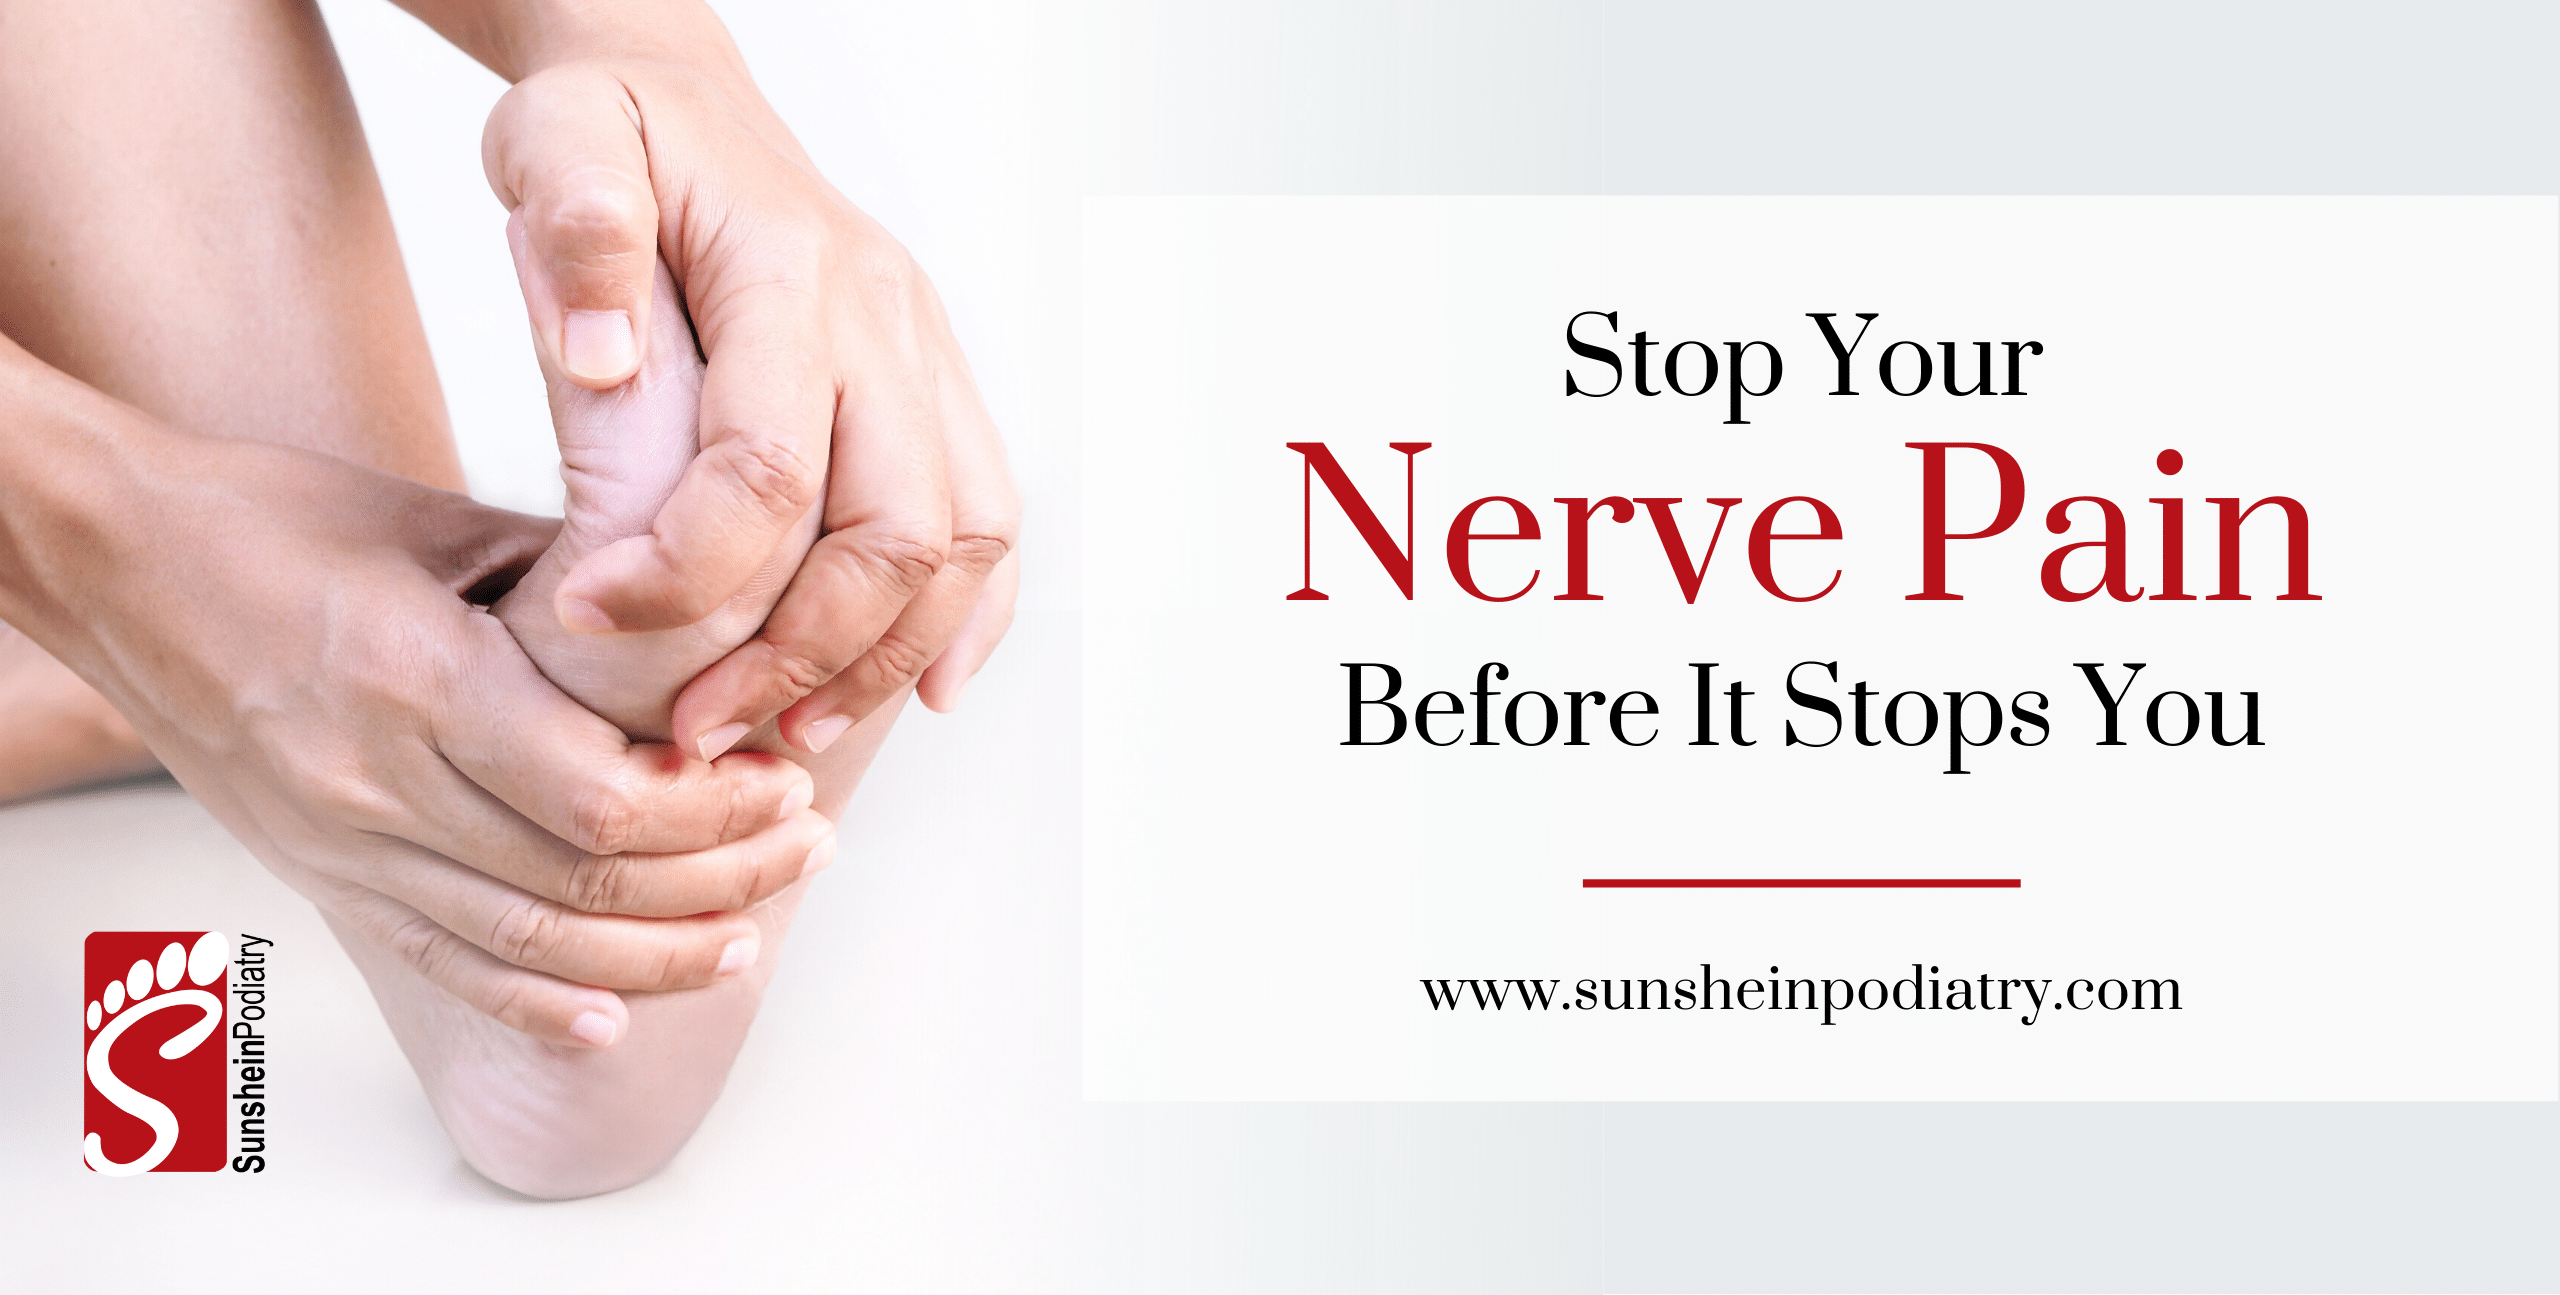 Stop Your Nerve Pain (Before It Stops You)